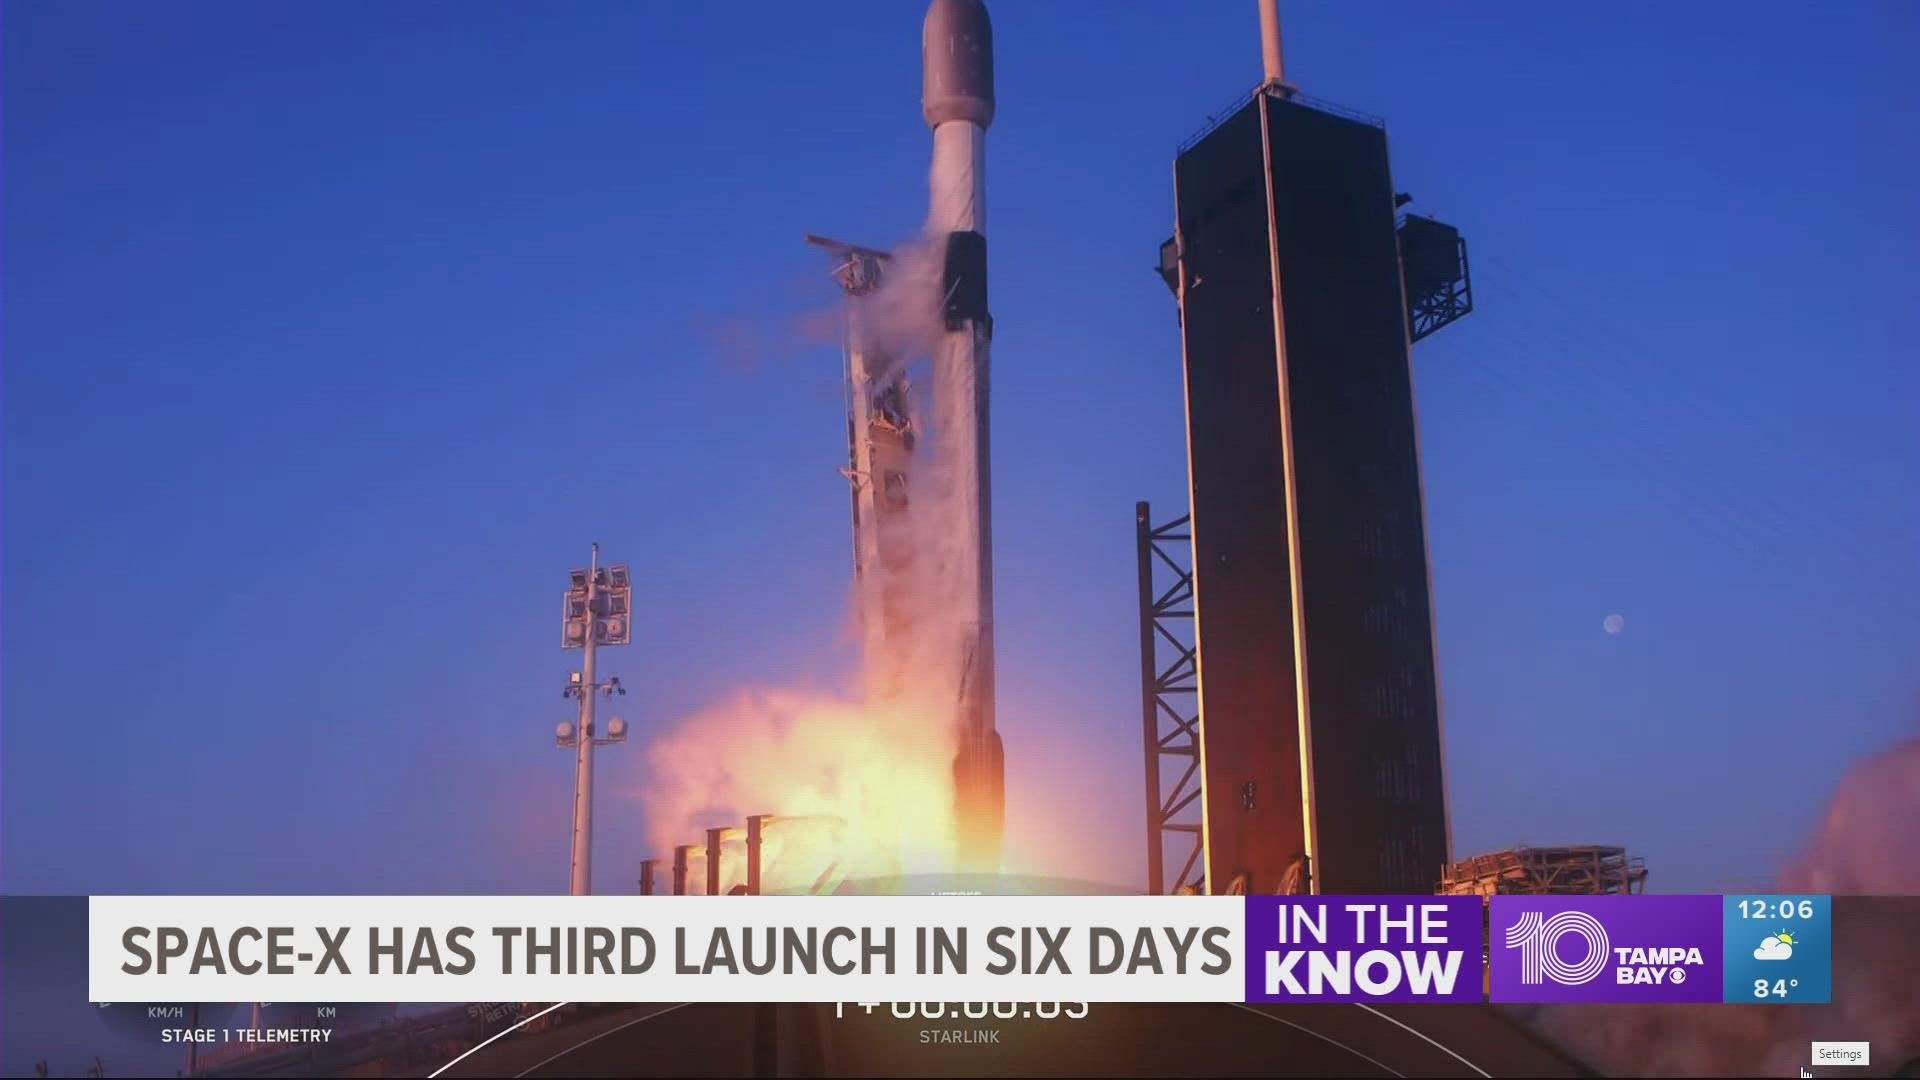 Liftoff occurred at 6:59 a.m. on Wednesday, May 18.